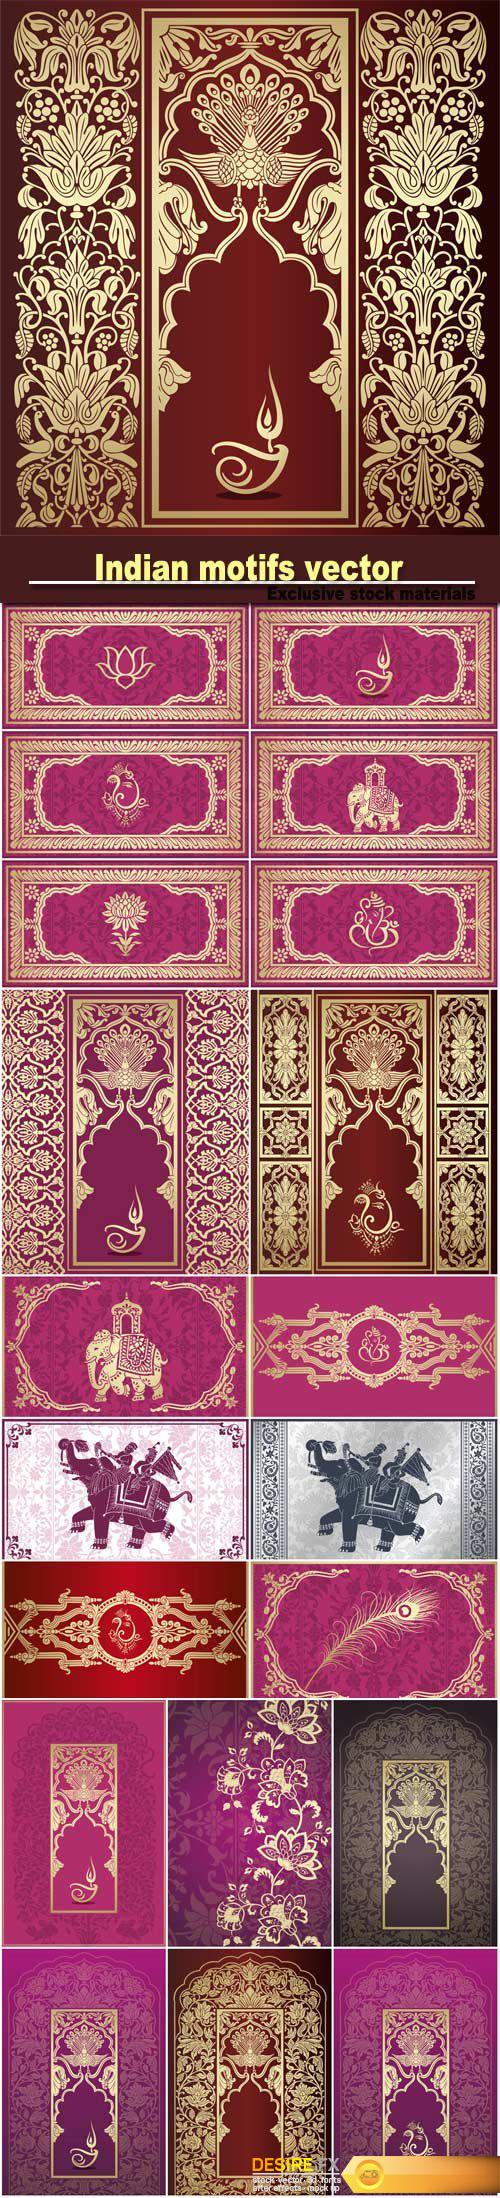 Beautiful Indian motifs vector, patterns and ornaments